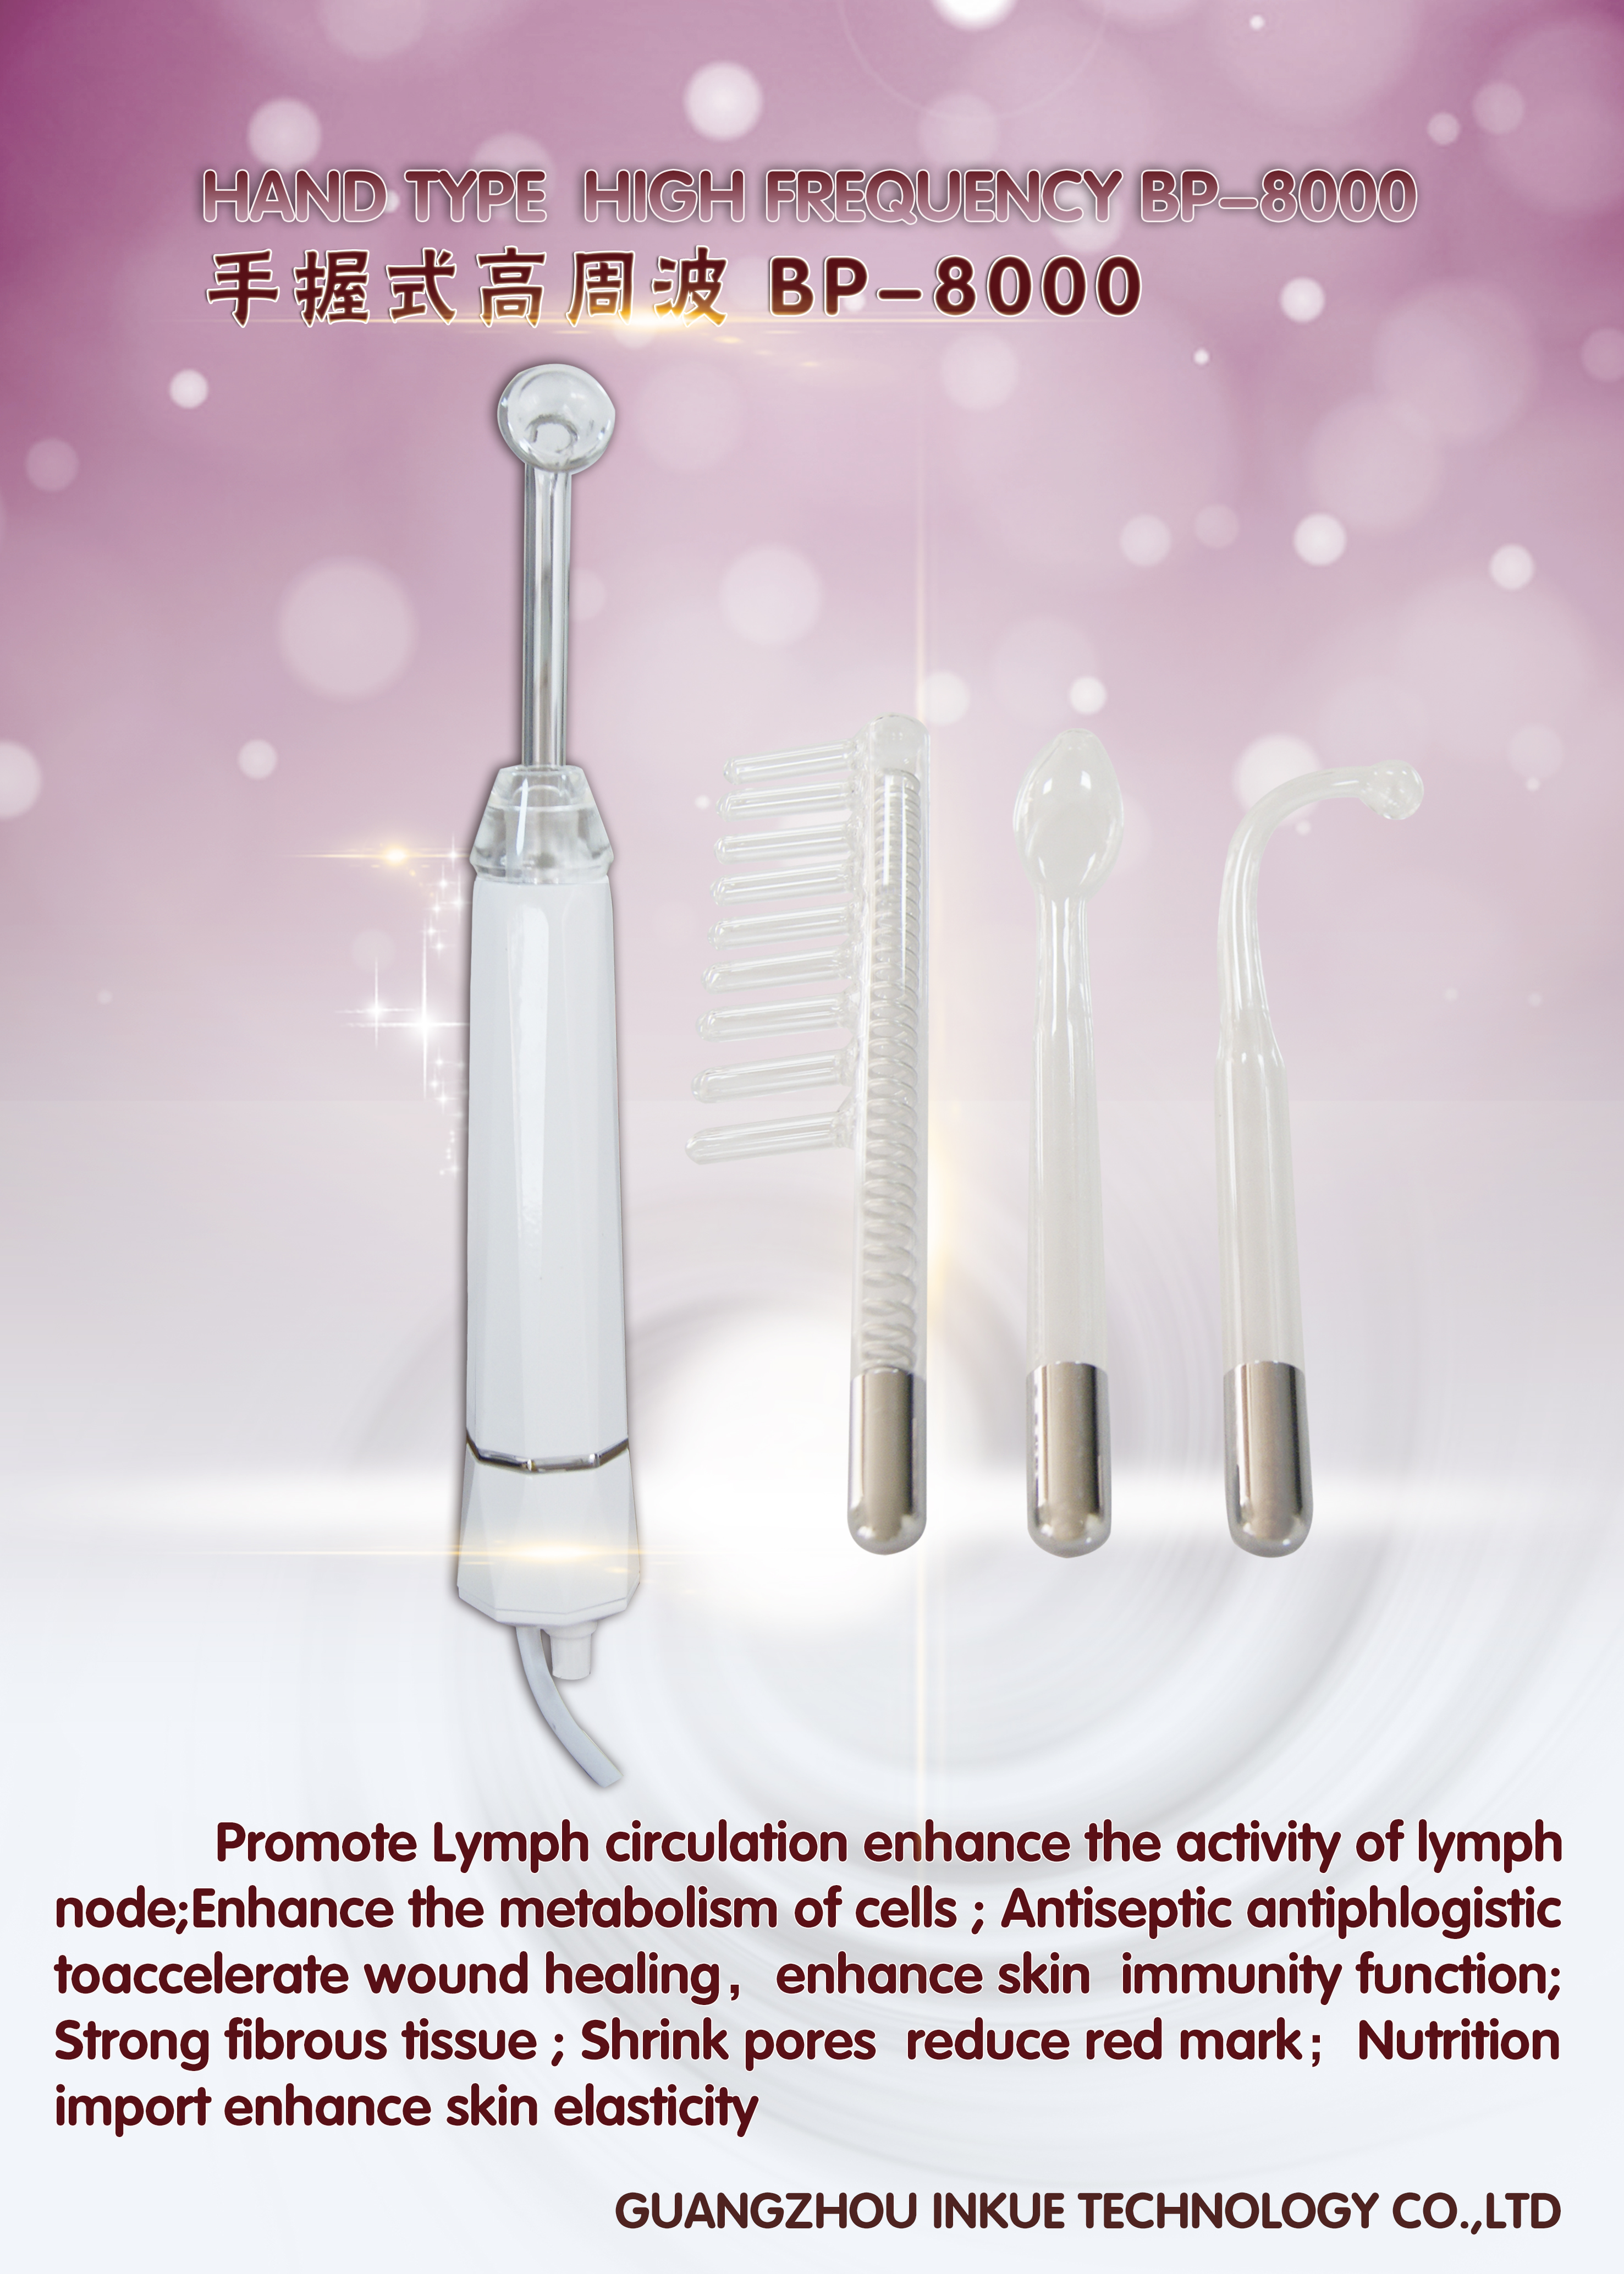 High frequency face machine portable handheld high frequency facial stick device violet argon acne is suitable for personal beauty, acne firming, wrinkle removing, eye and body care